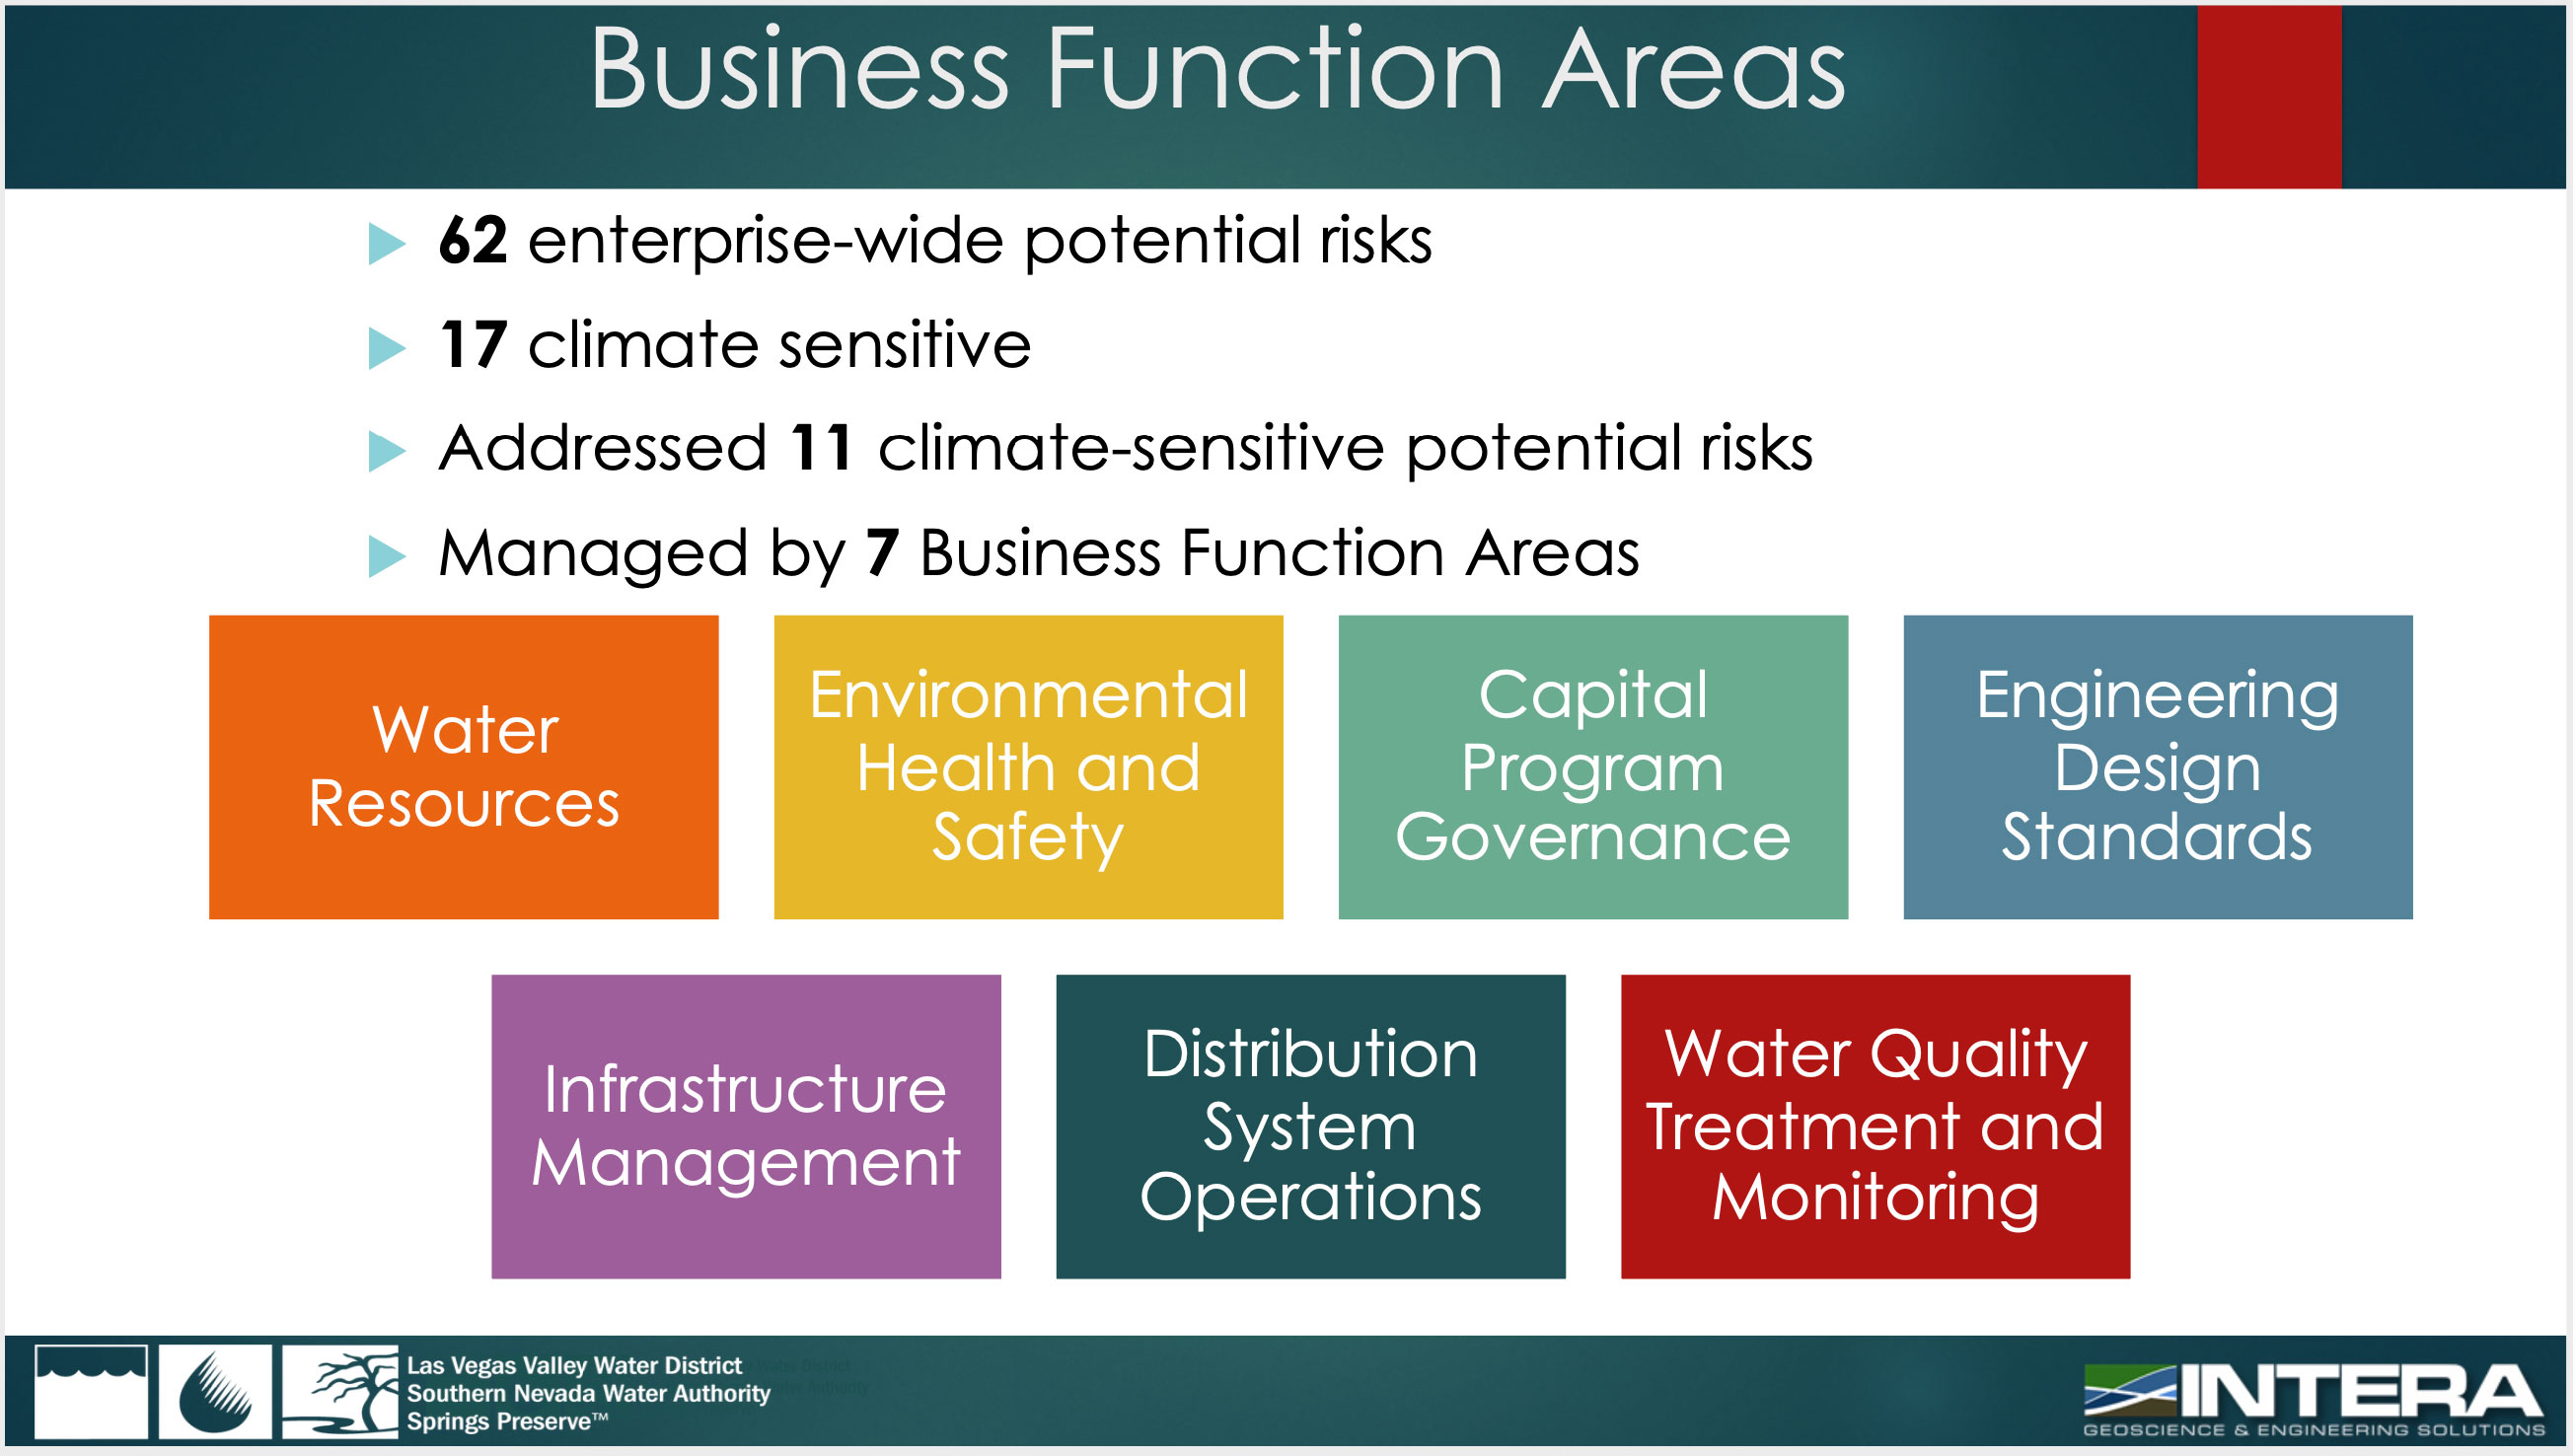 Slide notes 62 enterprise-wide potential risks, 17 climate sensitive, addressed 11 climate-sensitive potential risks, managed by 7 business function areas which are water resources, environmental health and safety, capital program governance, engineering design standards, infrastructure management, distribution system operations and water quality treatment and monitoring